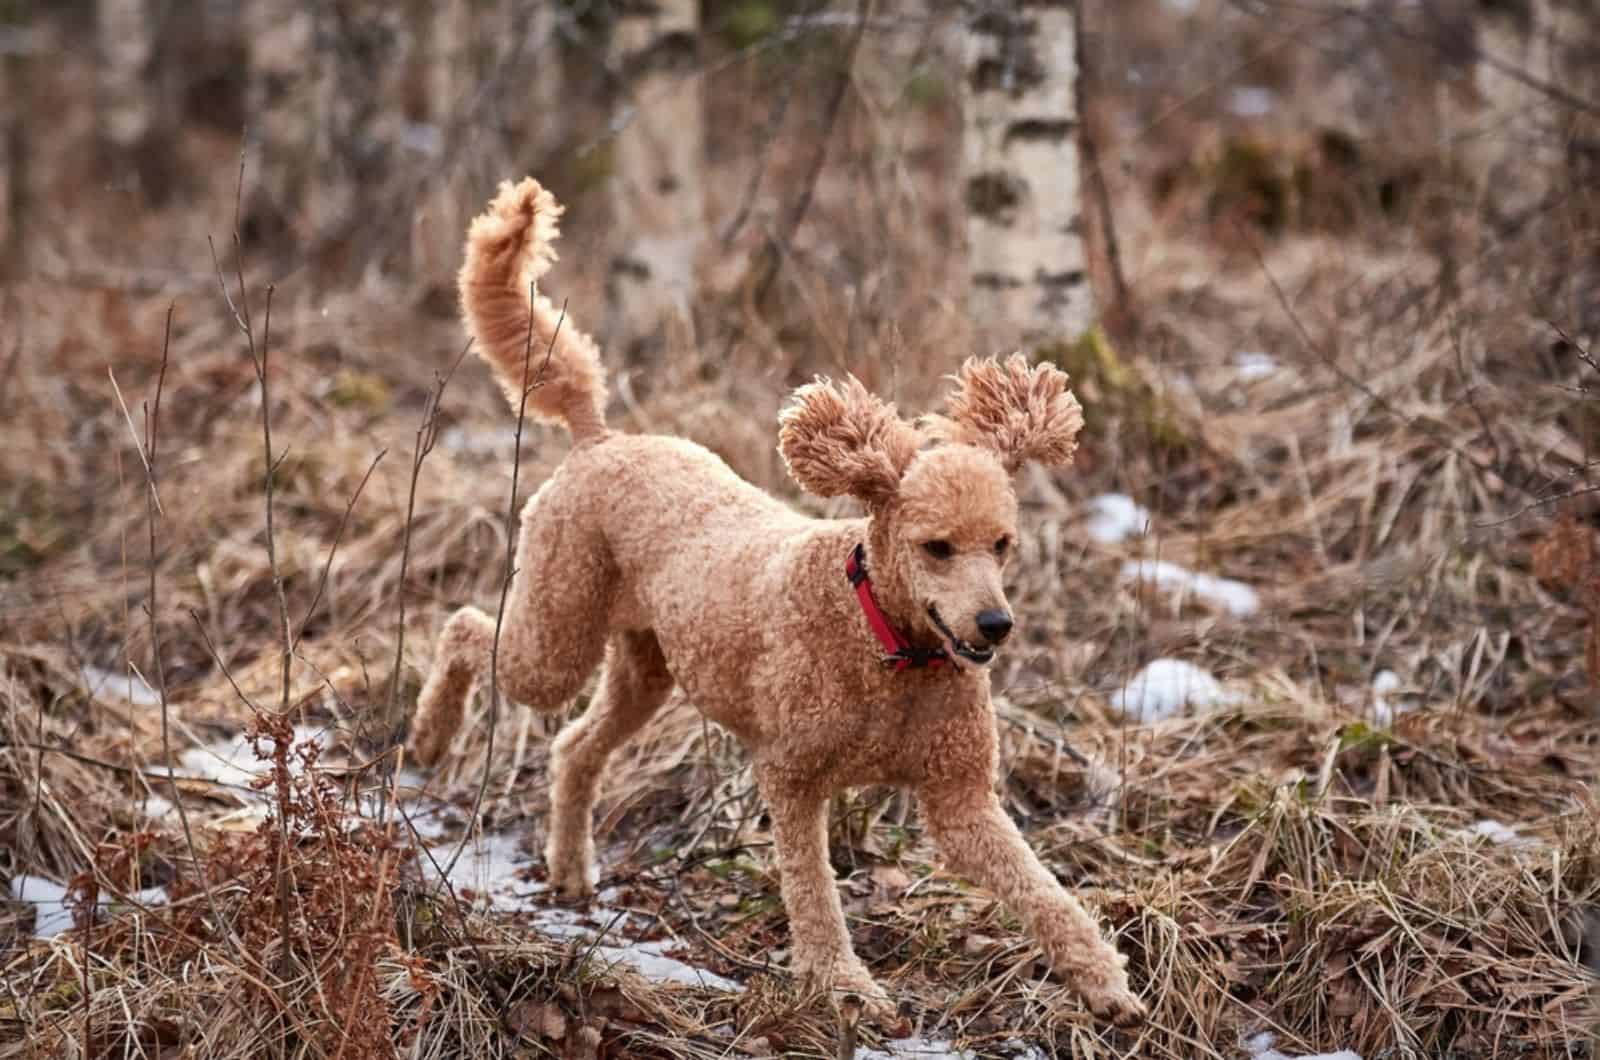 poodle running on icy forest path while hunting